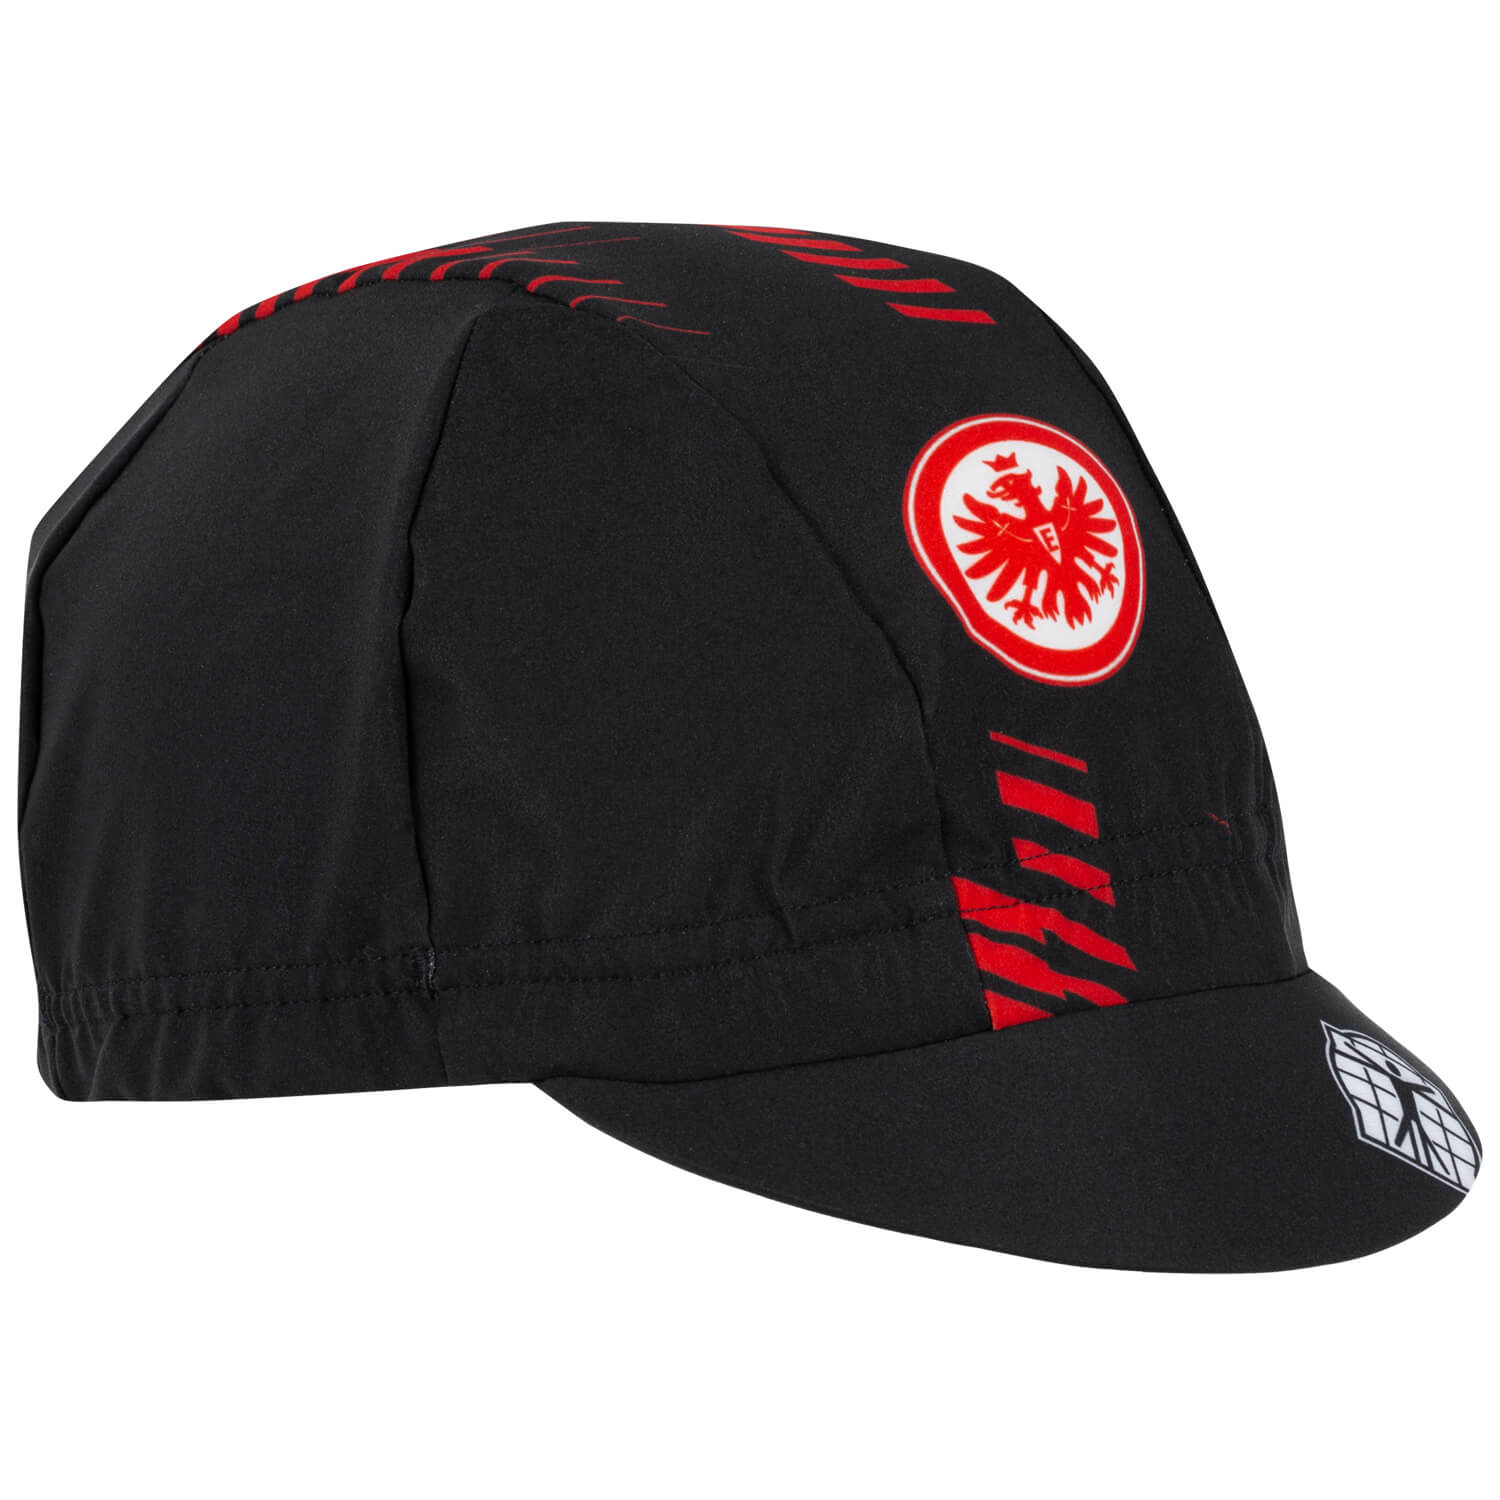 Bild 3: Cycling Cap Red Style 